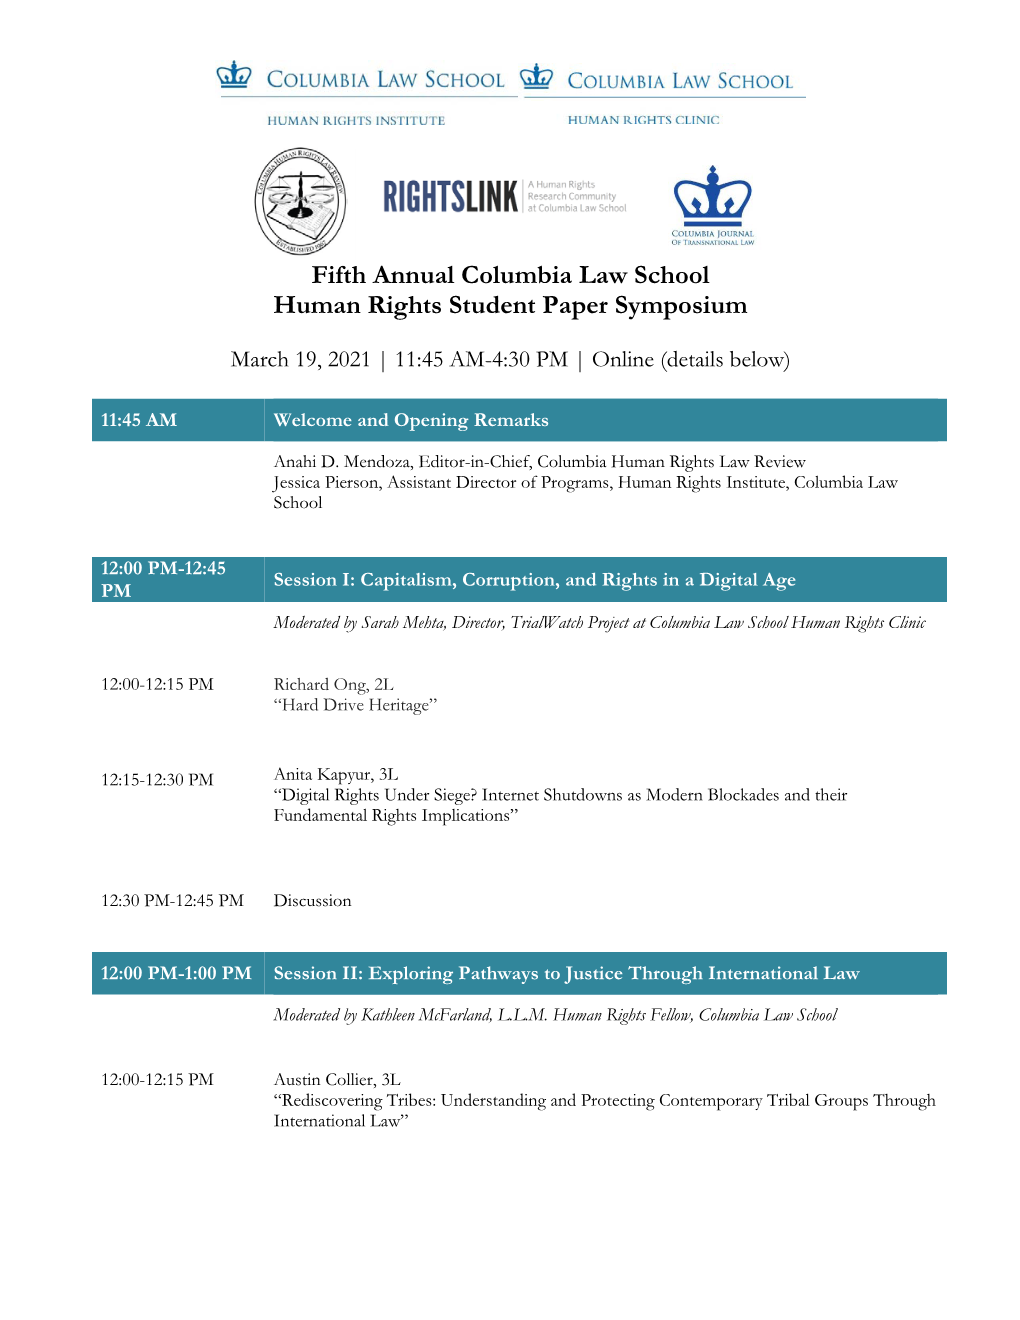 Fifth Annual Columbia Law School Human Rights Student Paper Symposium